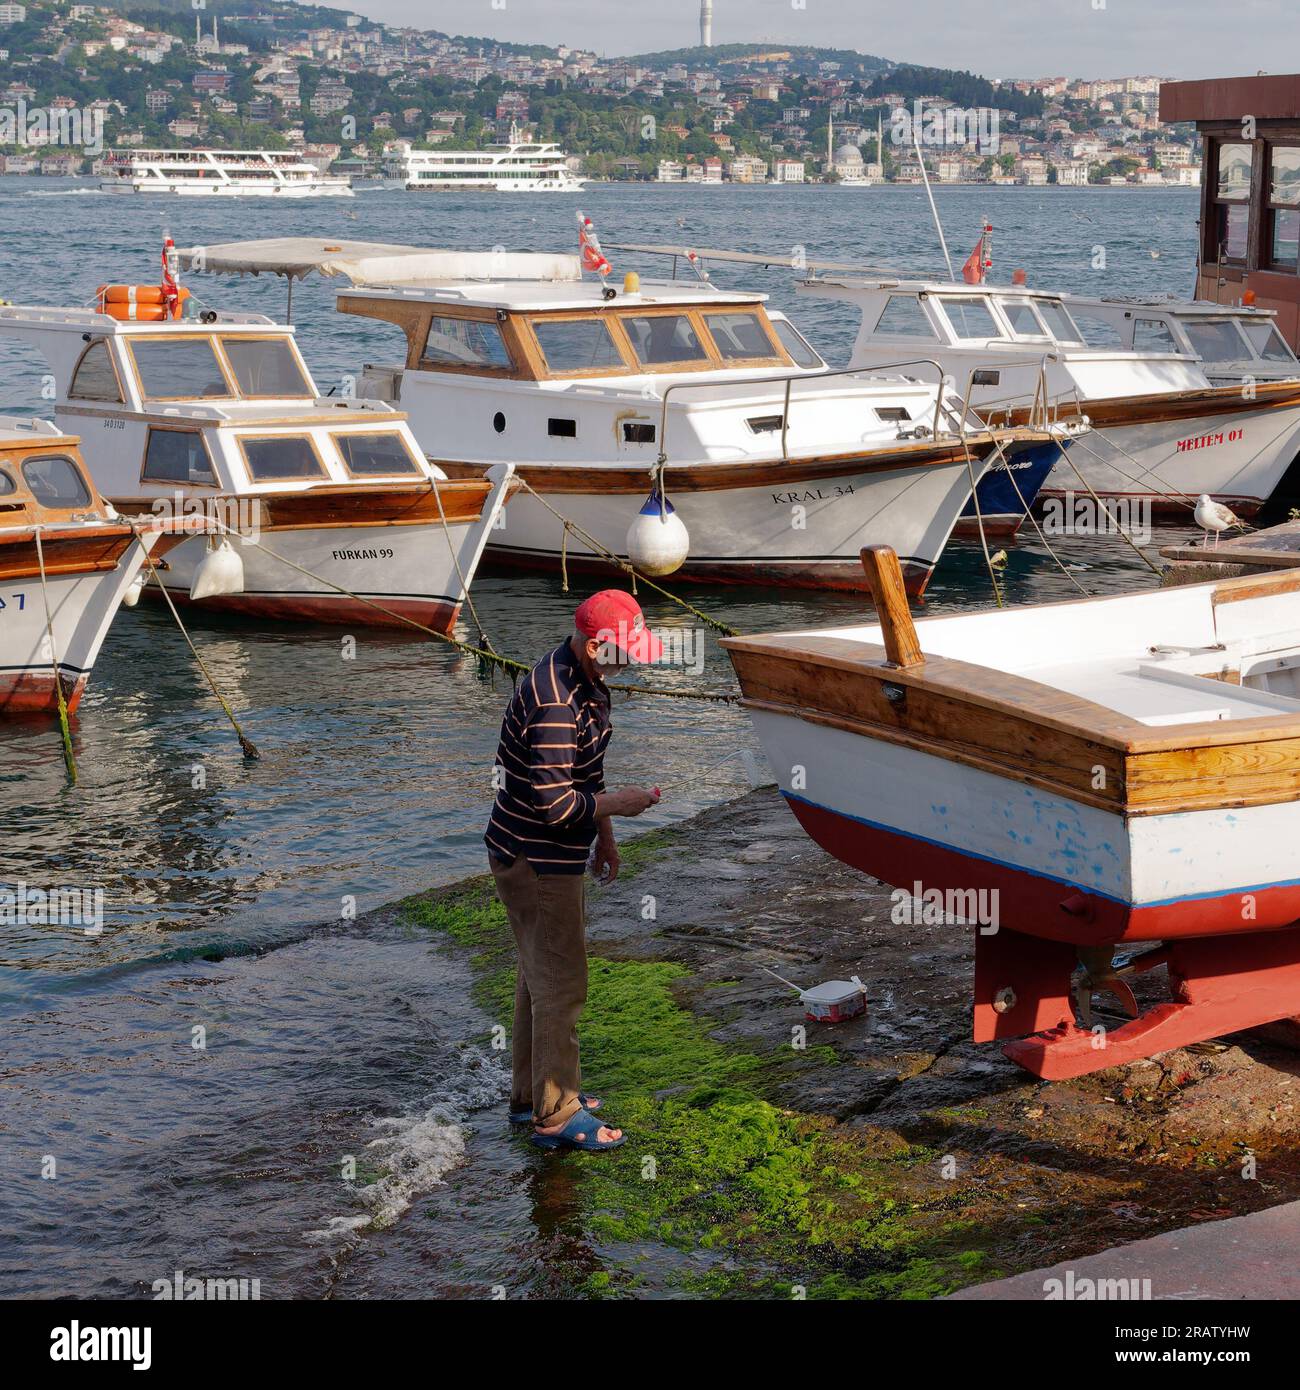 Man paints a wooden boat on a summers evening by the Bosporus shoreline in Istanbul. Passenger ferries and the Asian side in the background. Turkey Stock Photo